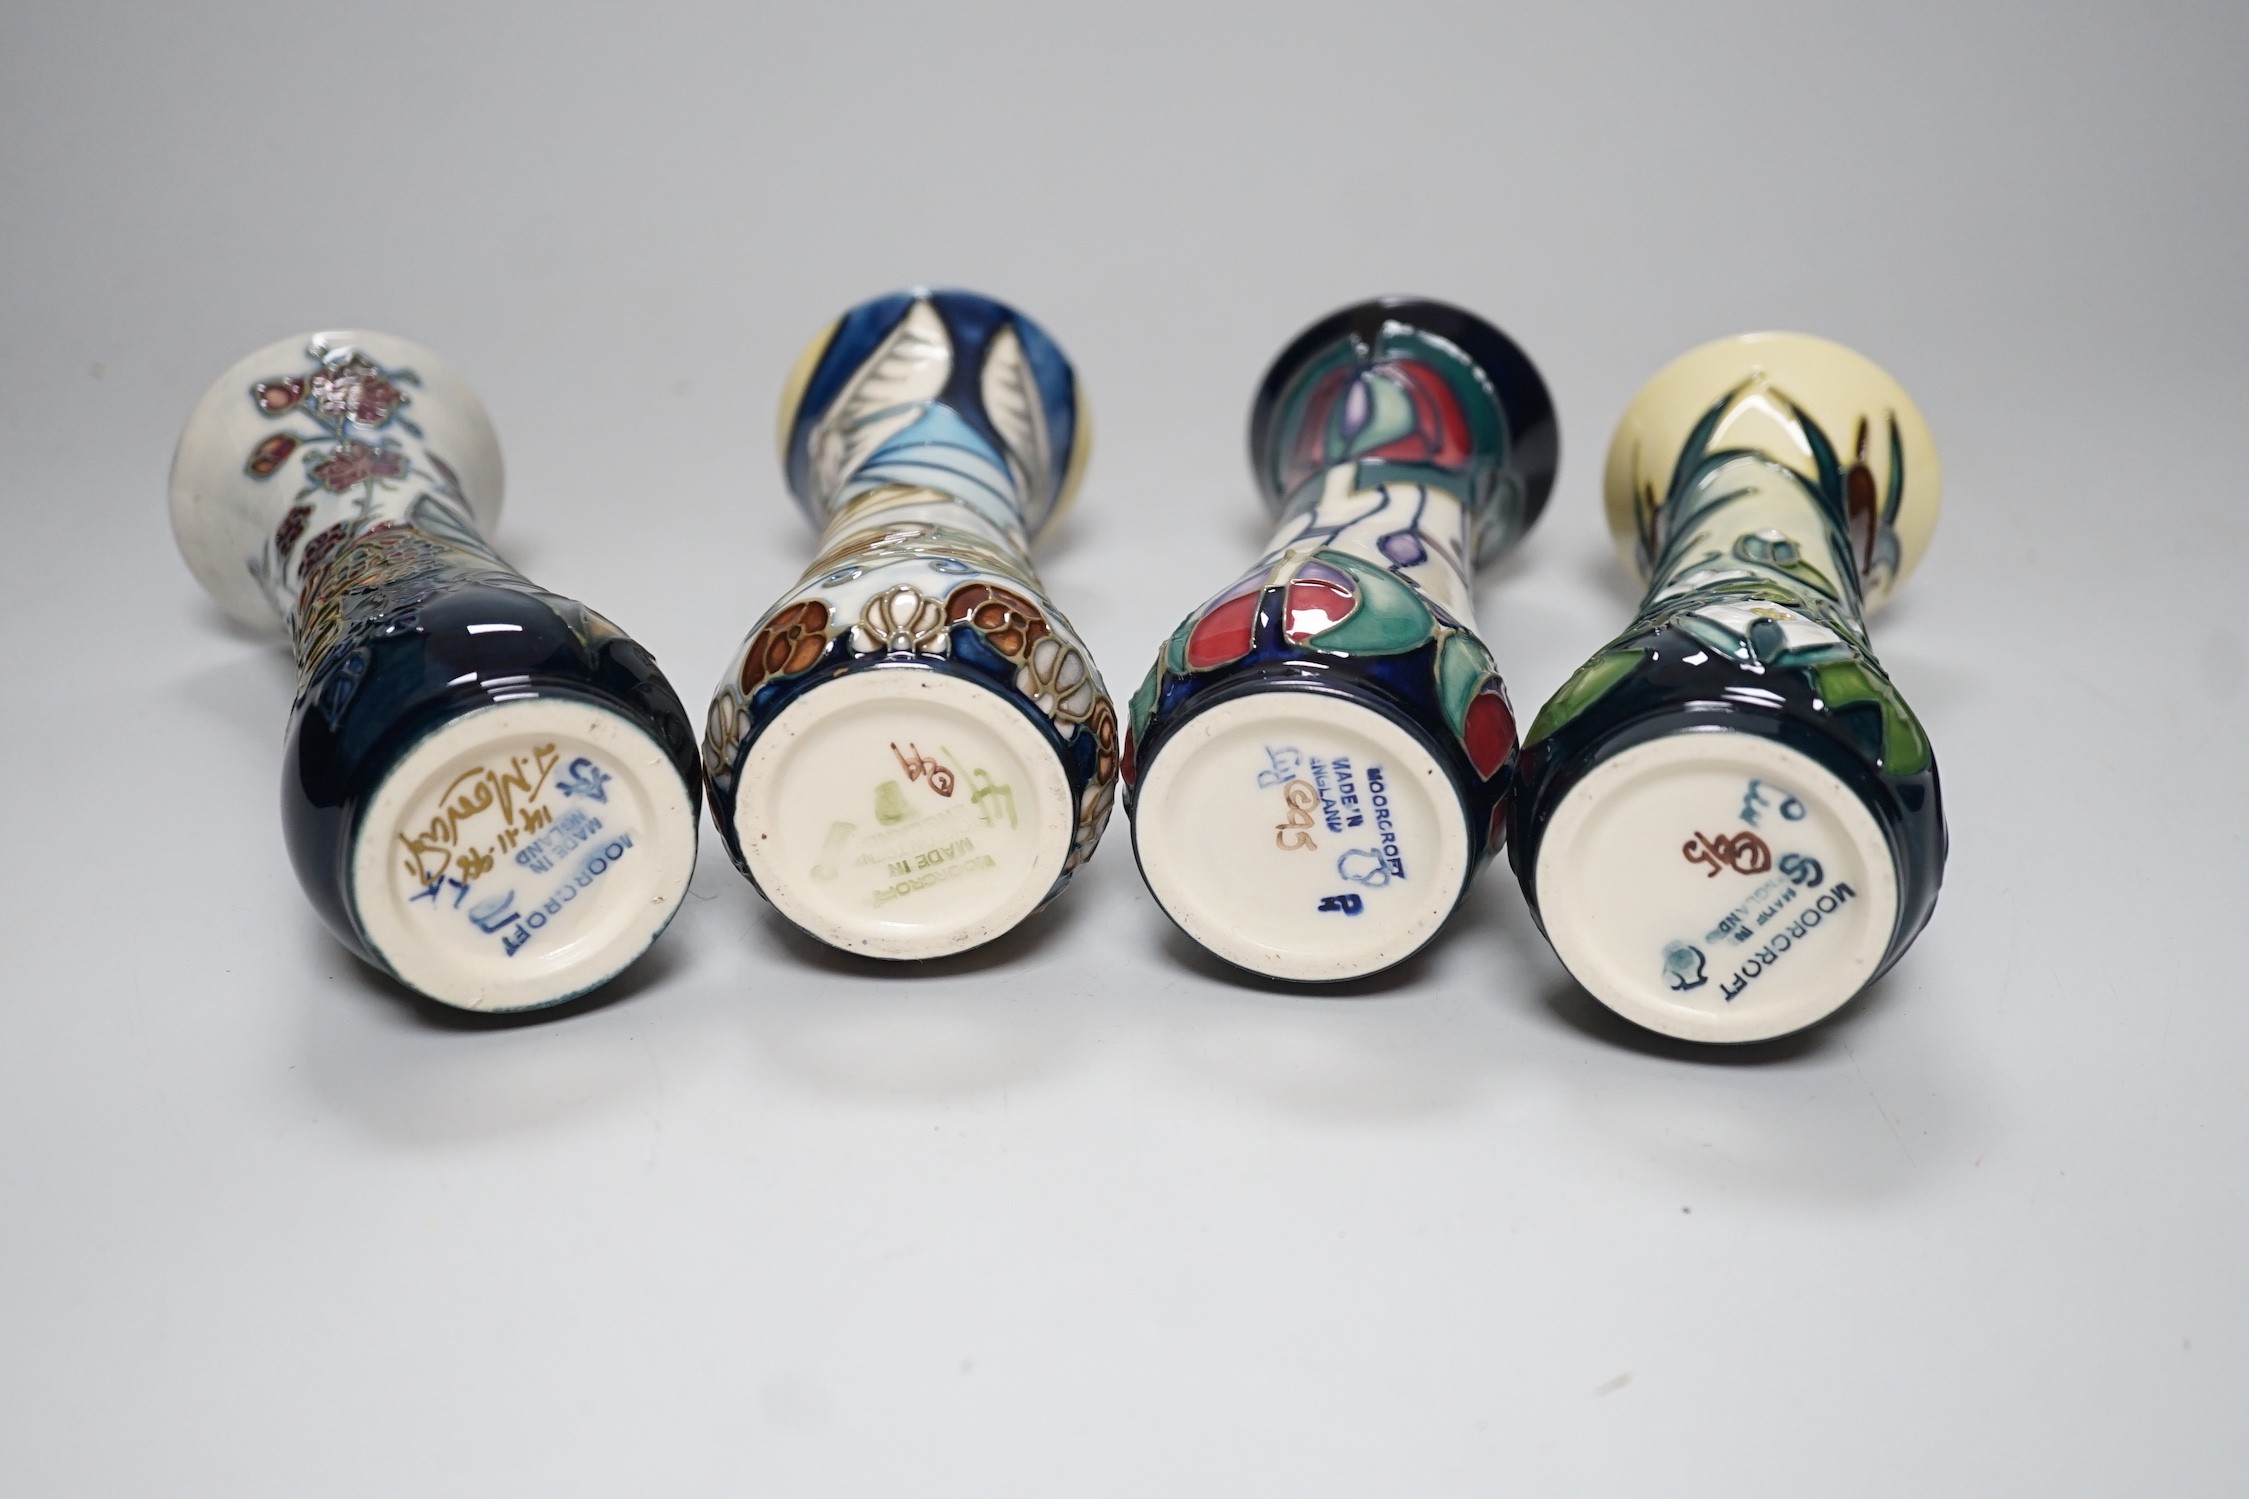 Four boxed small Moorcroft vases, Blackberry, Bulrush, Winds of Change, and a Rennie Macintosh - Image 4 of 4